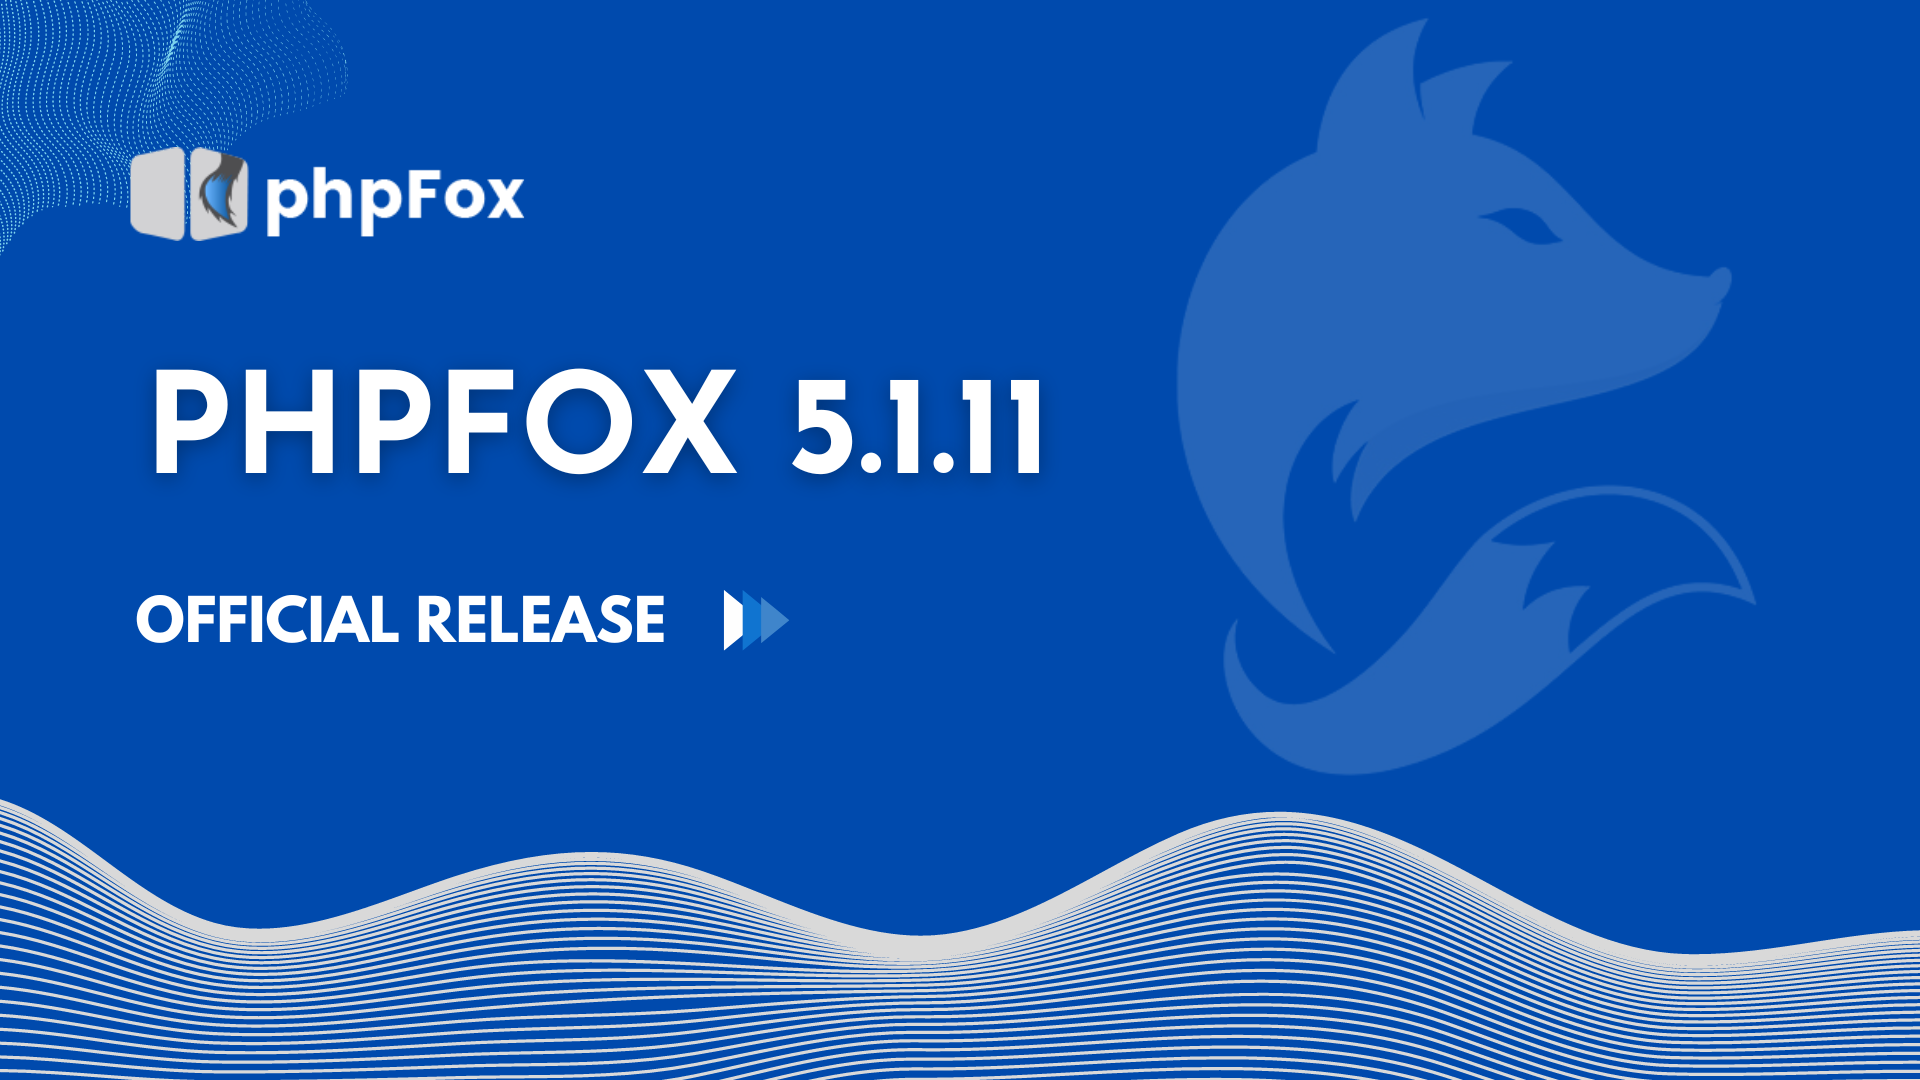 phpFox 5.1.11 Official Release